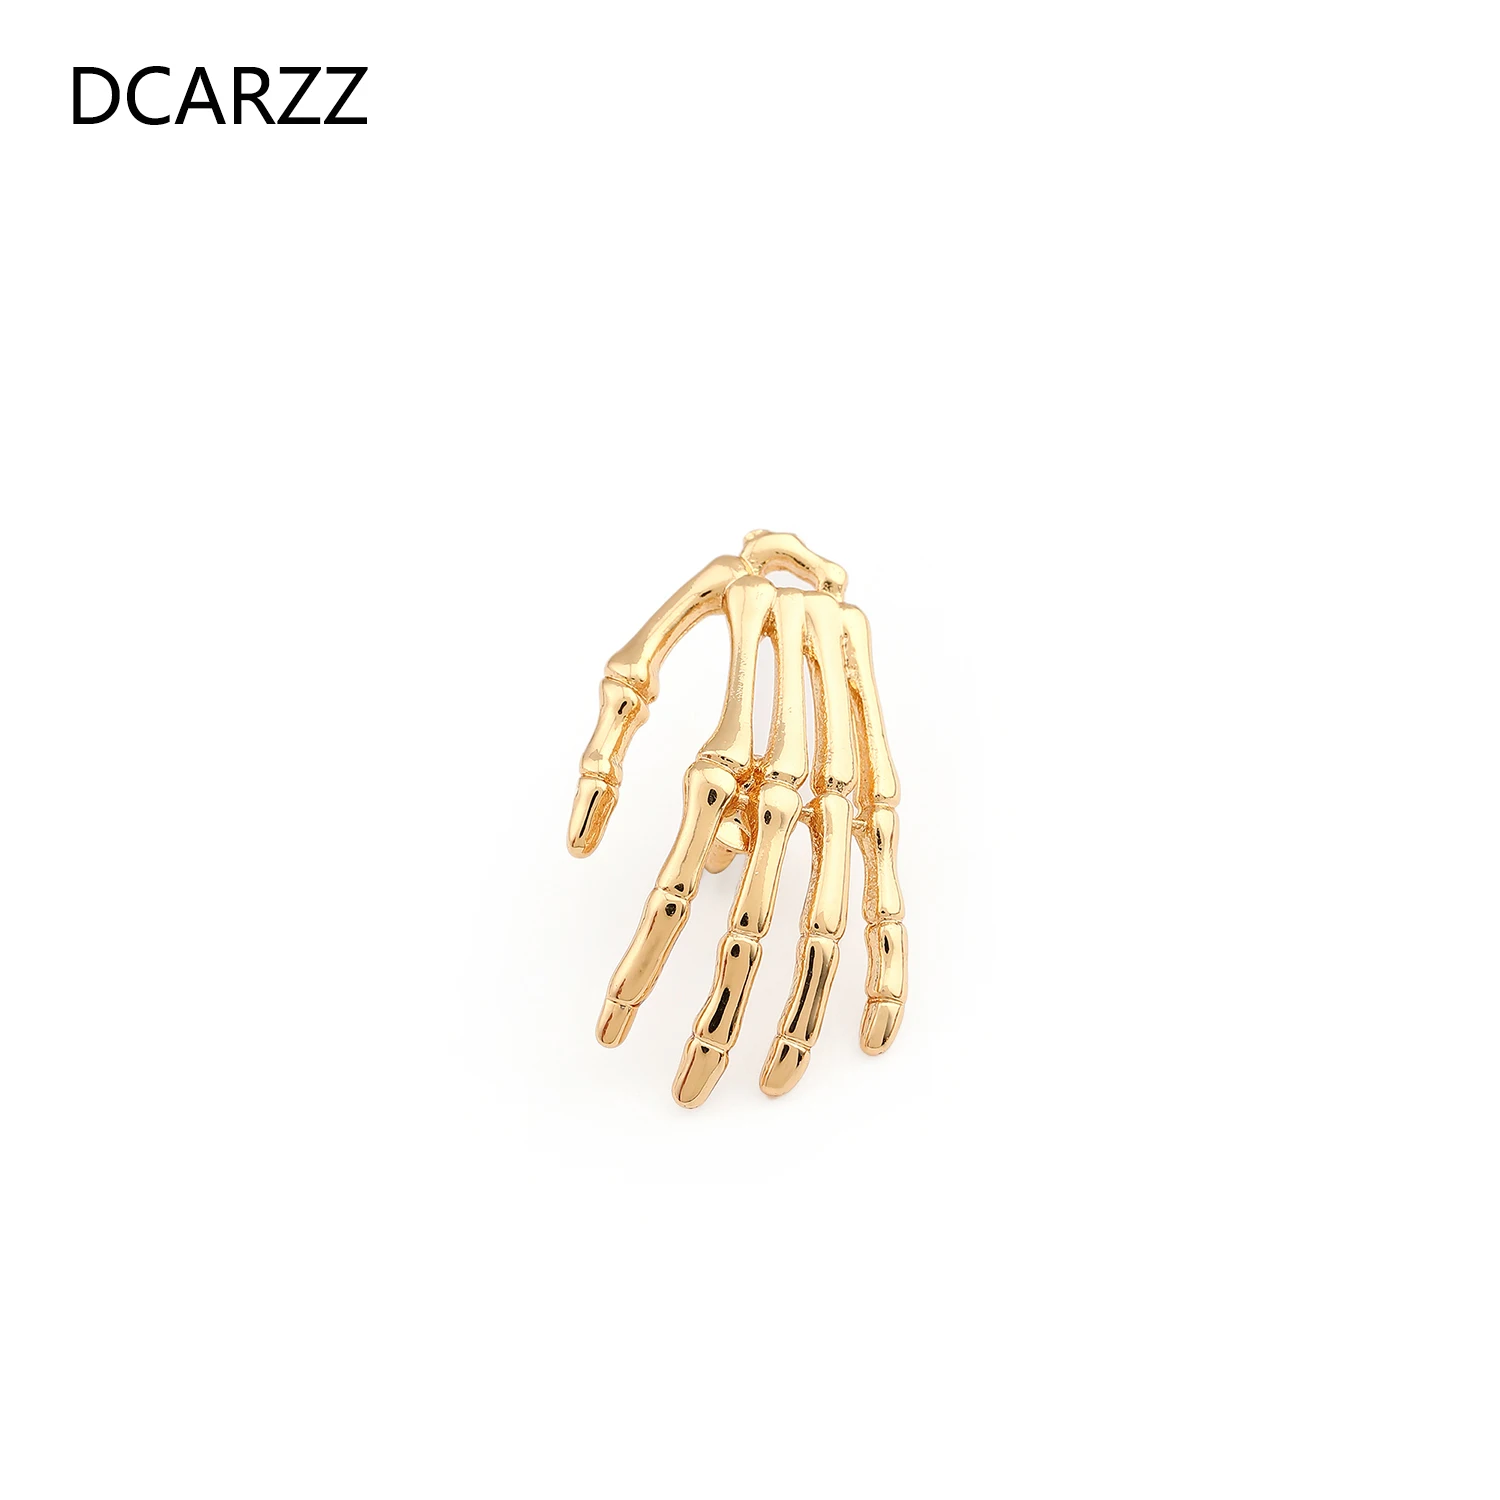 

DCARZZ Lapel Pin Brooch Medical Anatomy Skeleton Hand Plated Jewelry Pins Metal Doctor Nurse Women Accessories Gift